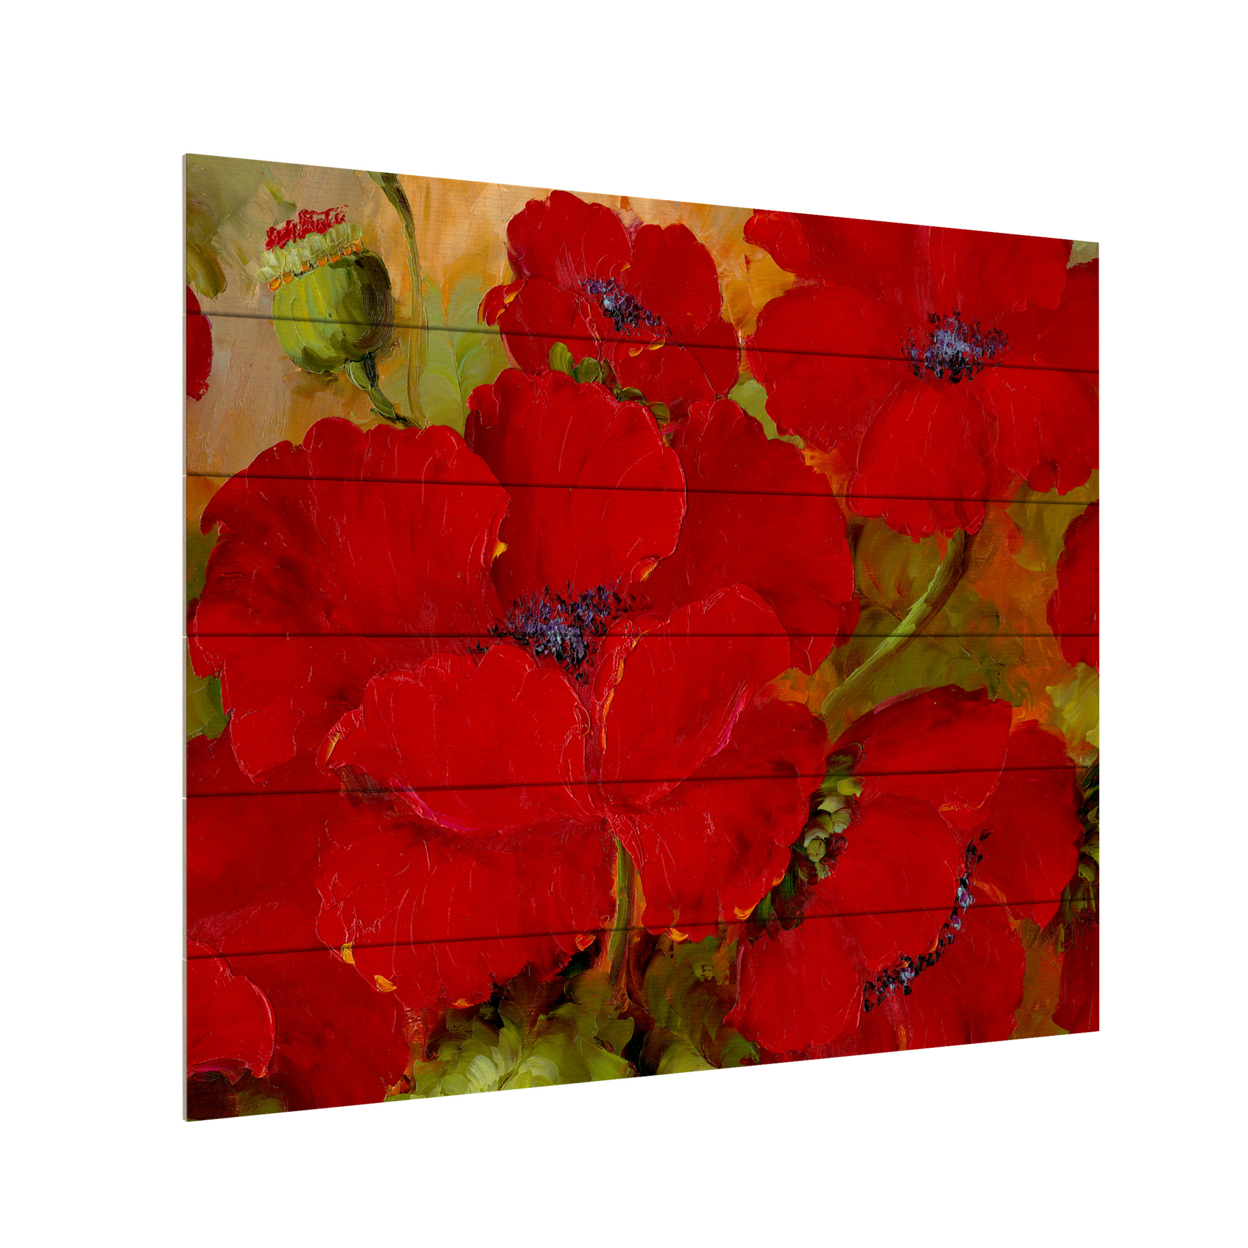 Wooden Slat Art 18 X 22 Inches Titled Poppies 2 Ready To Hang Home Decor Picture